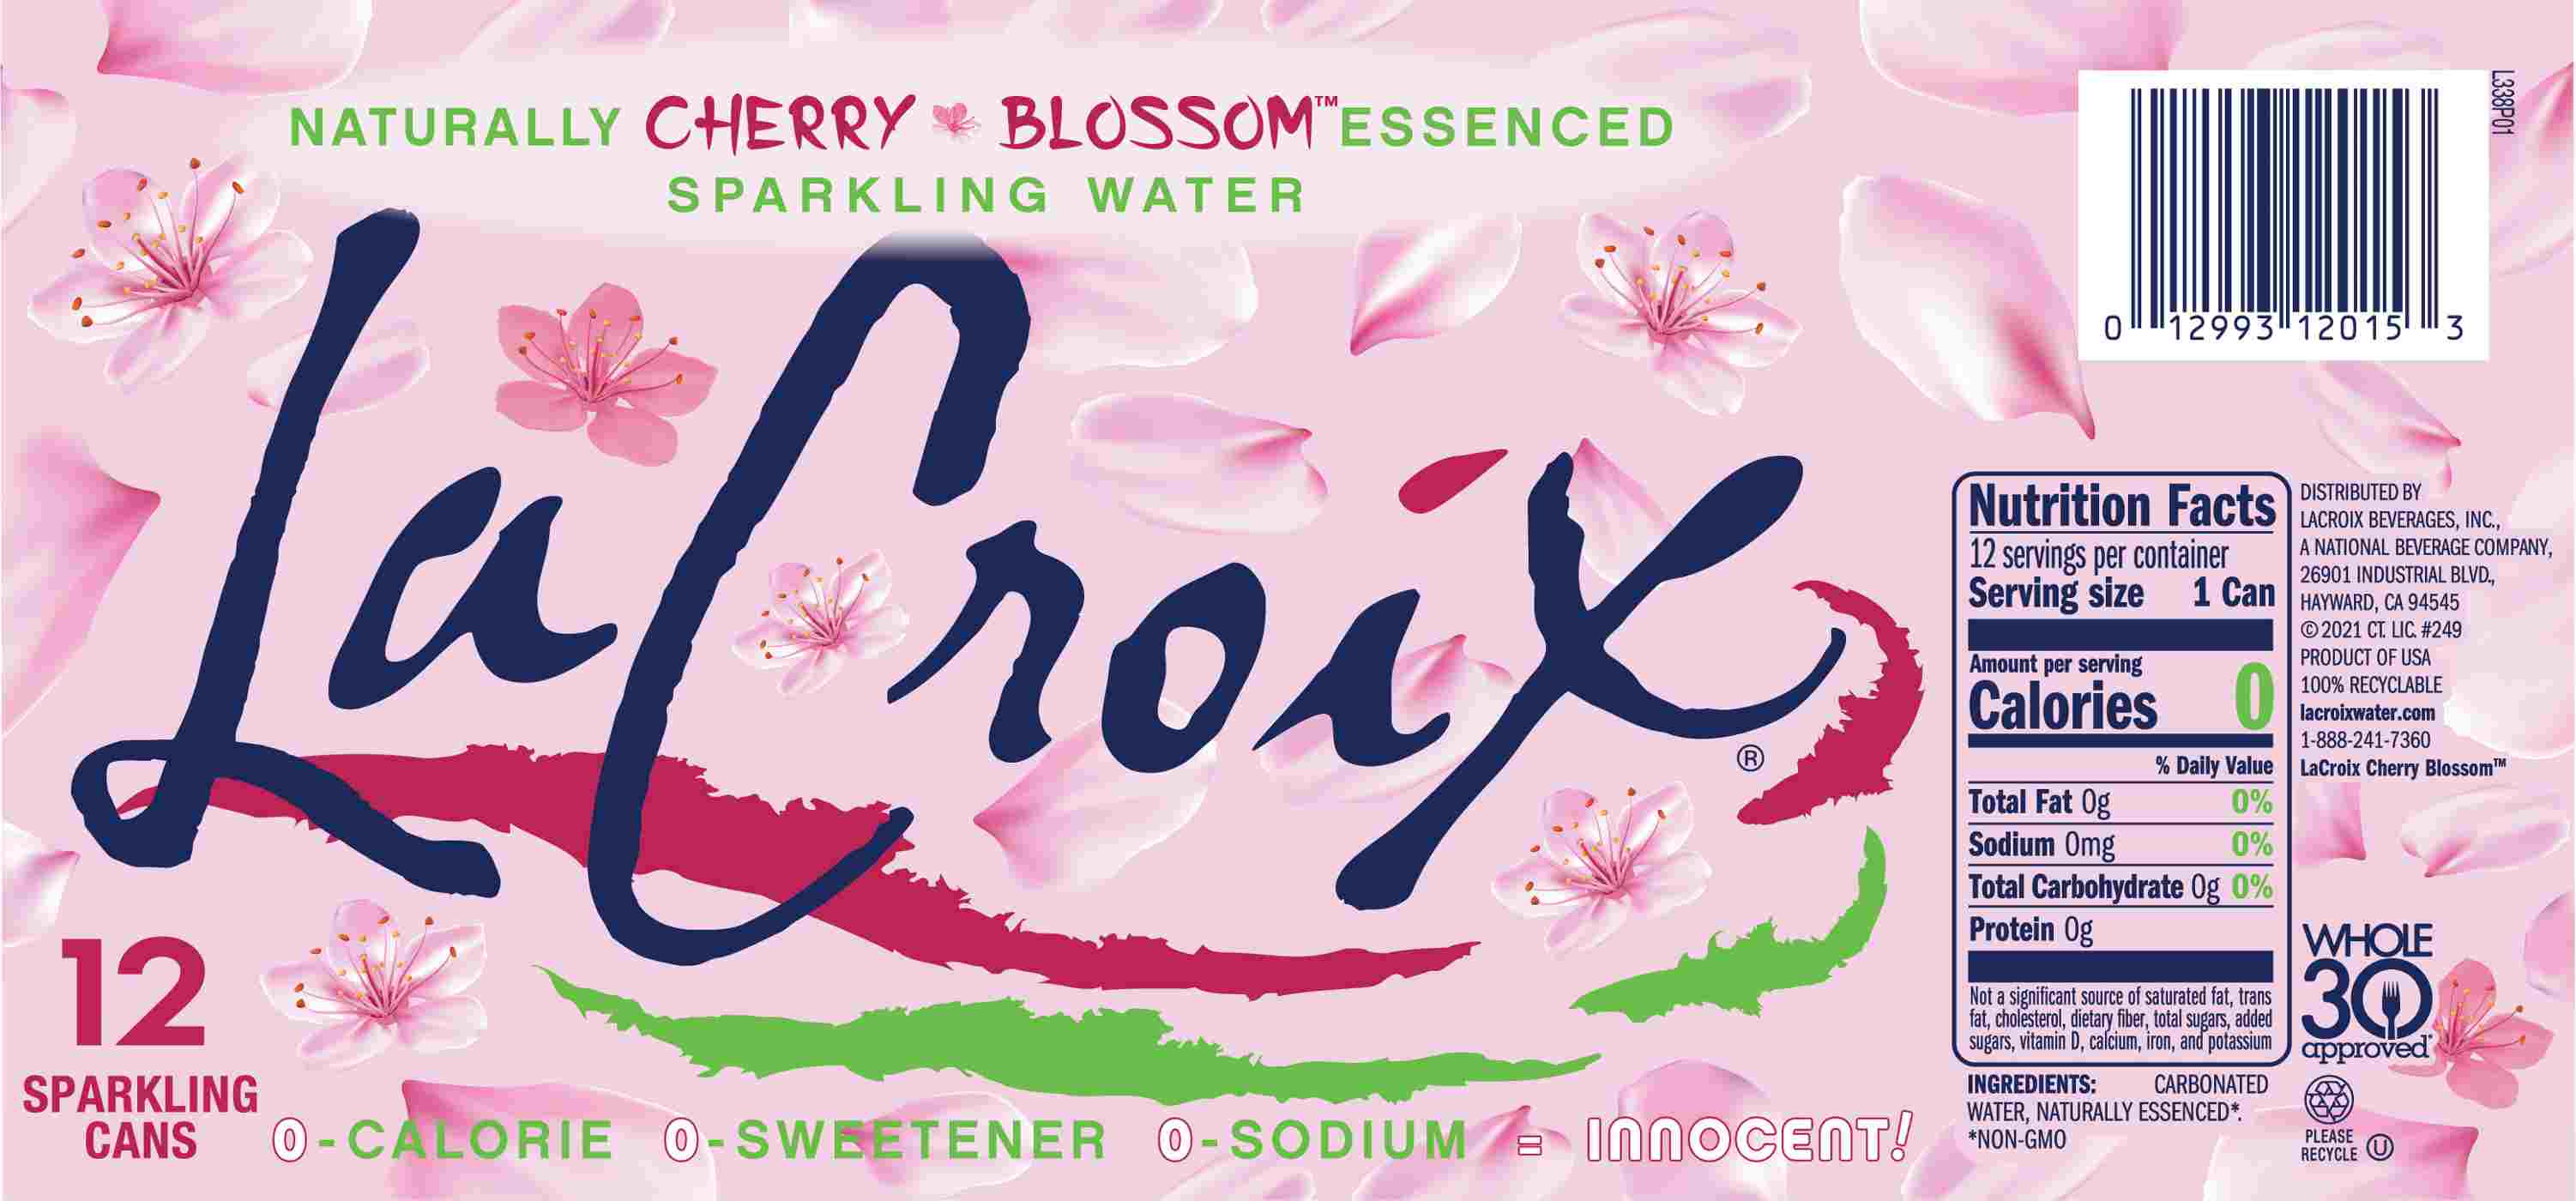 LaCroix Cherry Blossom Sparkling Water 12 oz Cans; image 3 of 4